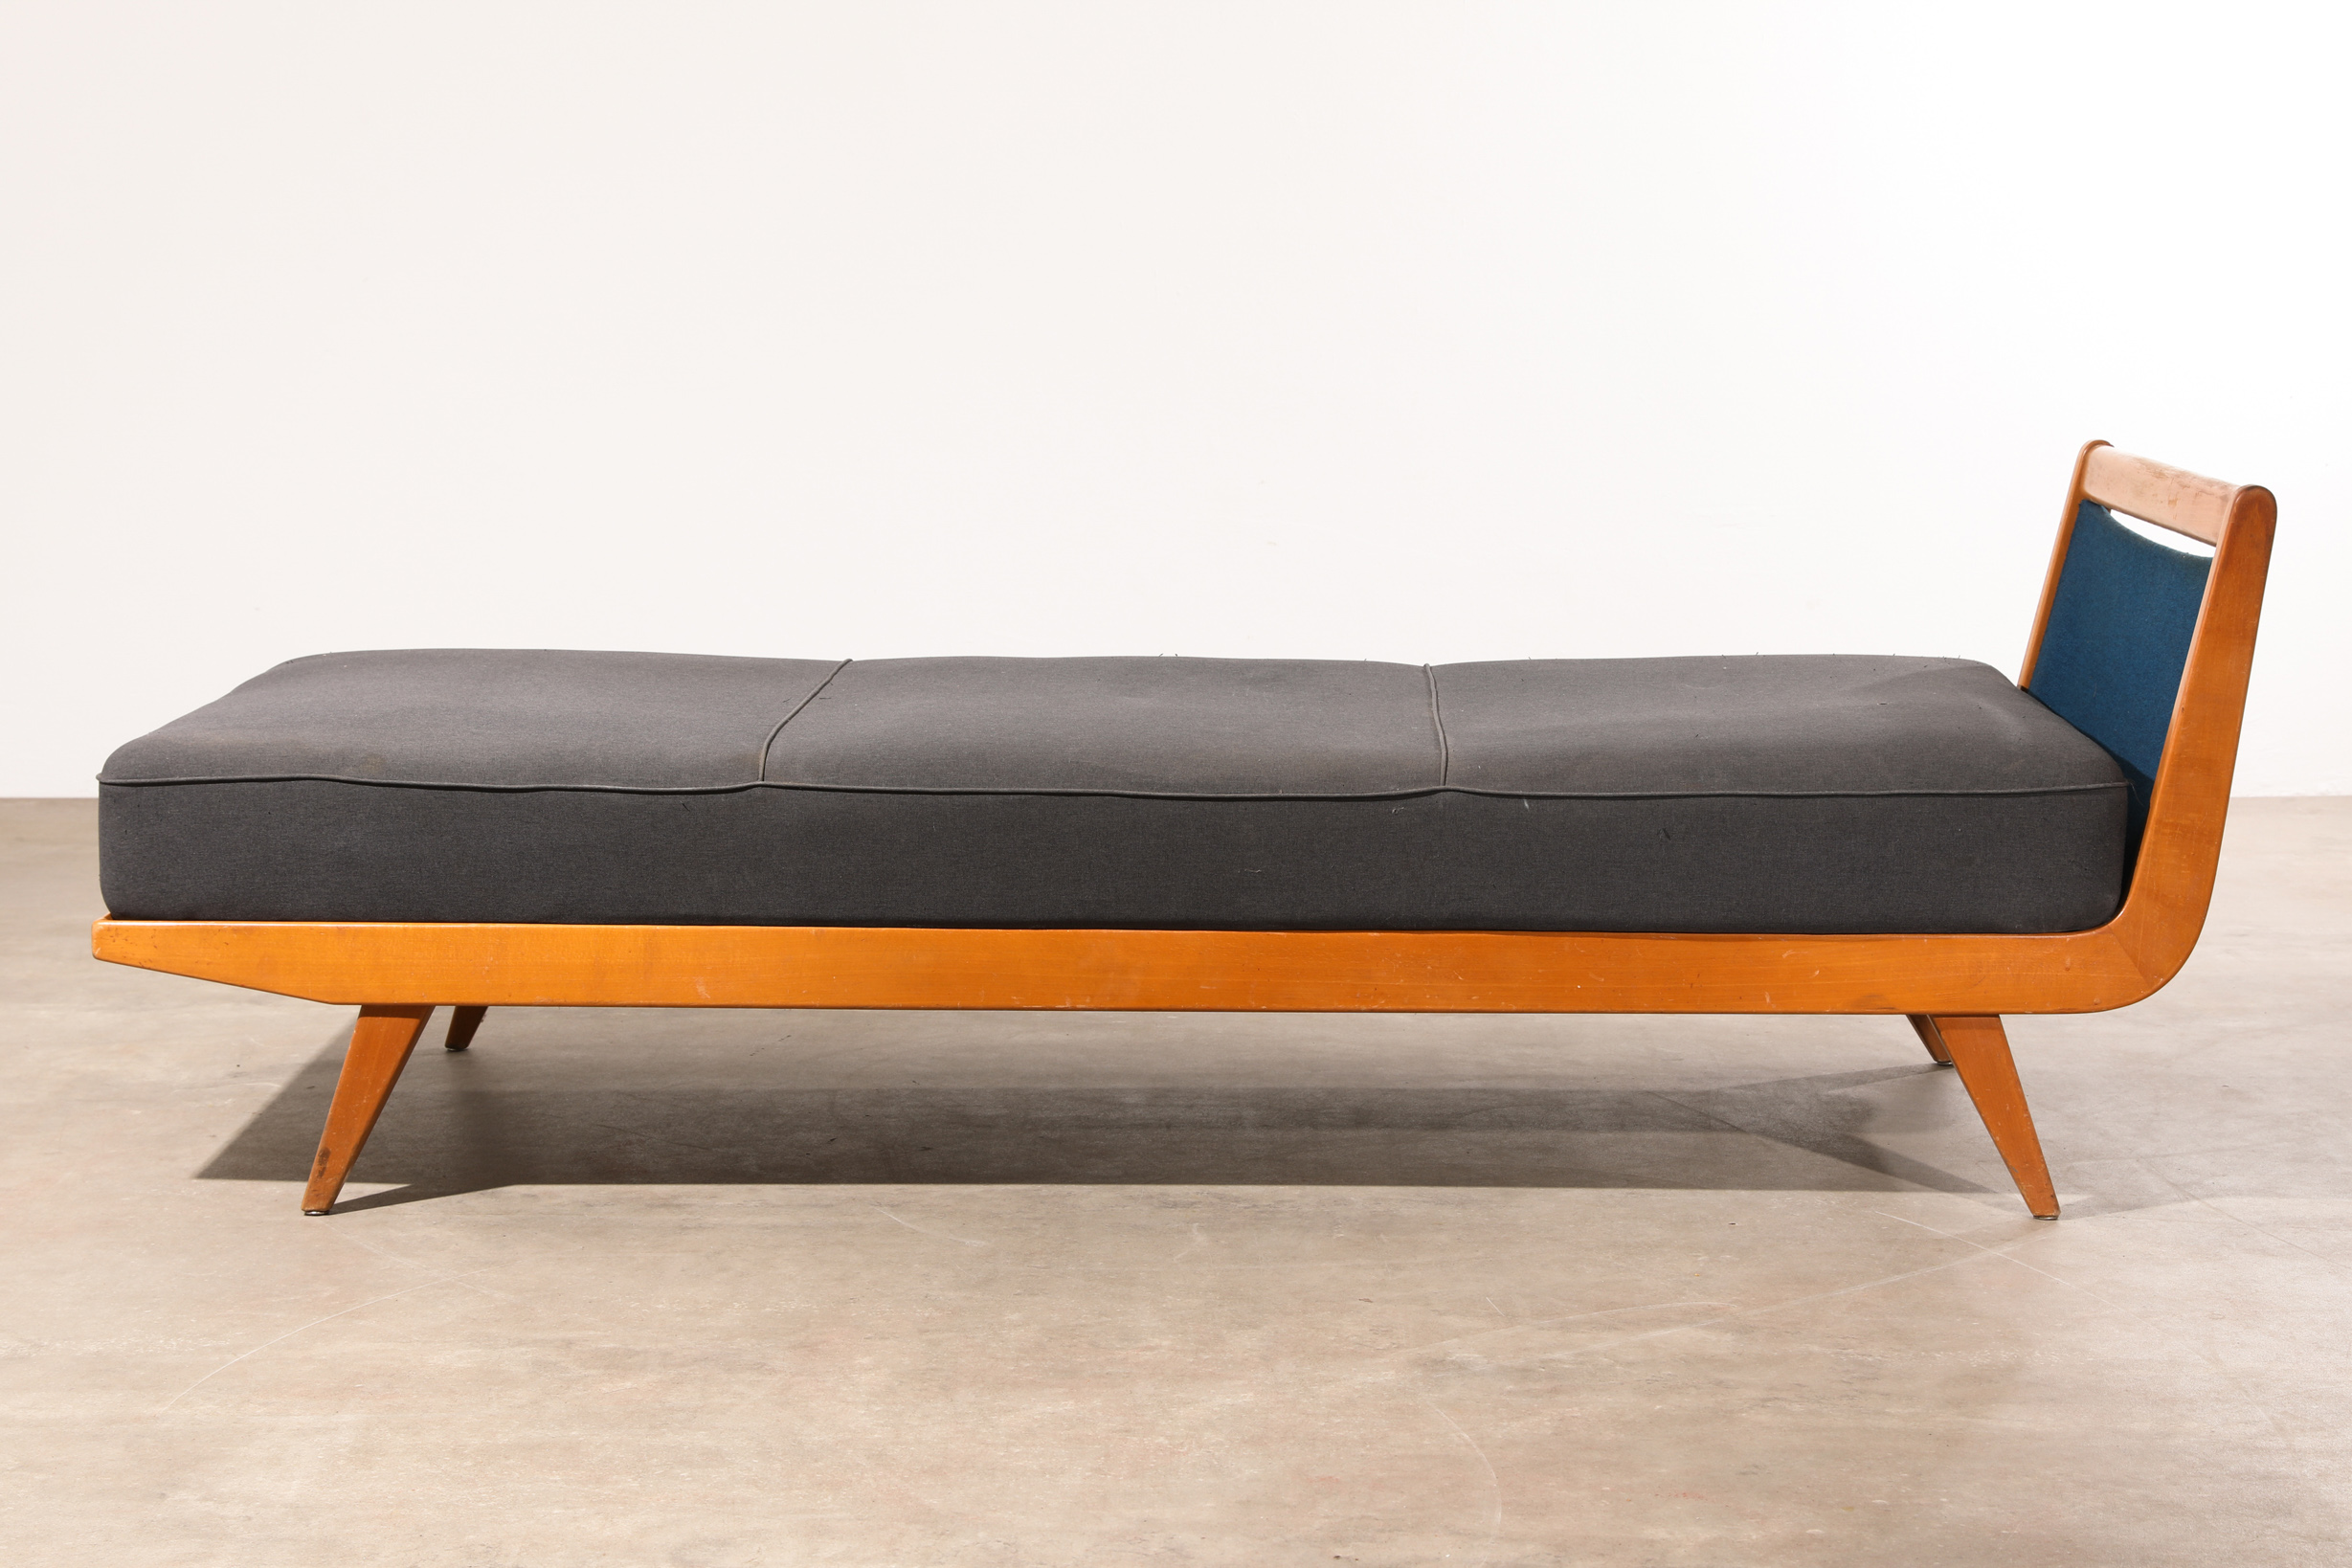 A. K. Schneider, Walter Knoll, Chaiselongue / Daybed, Model Vostra - Image 6 of 7